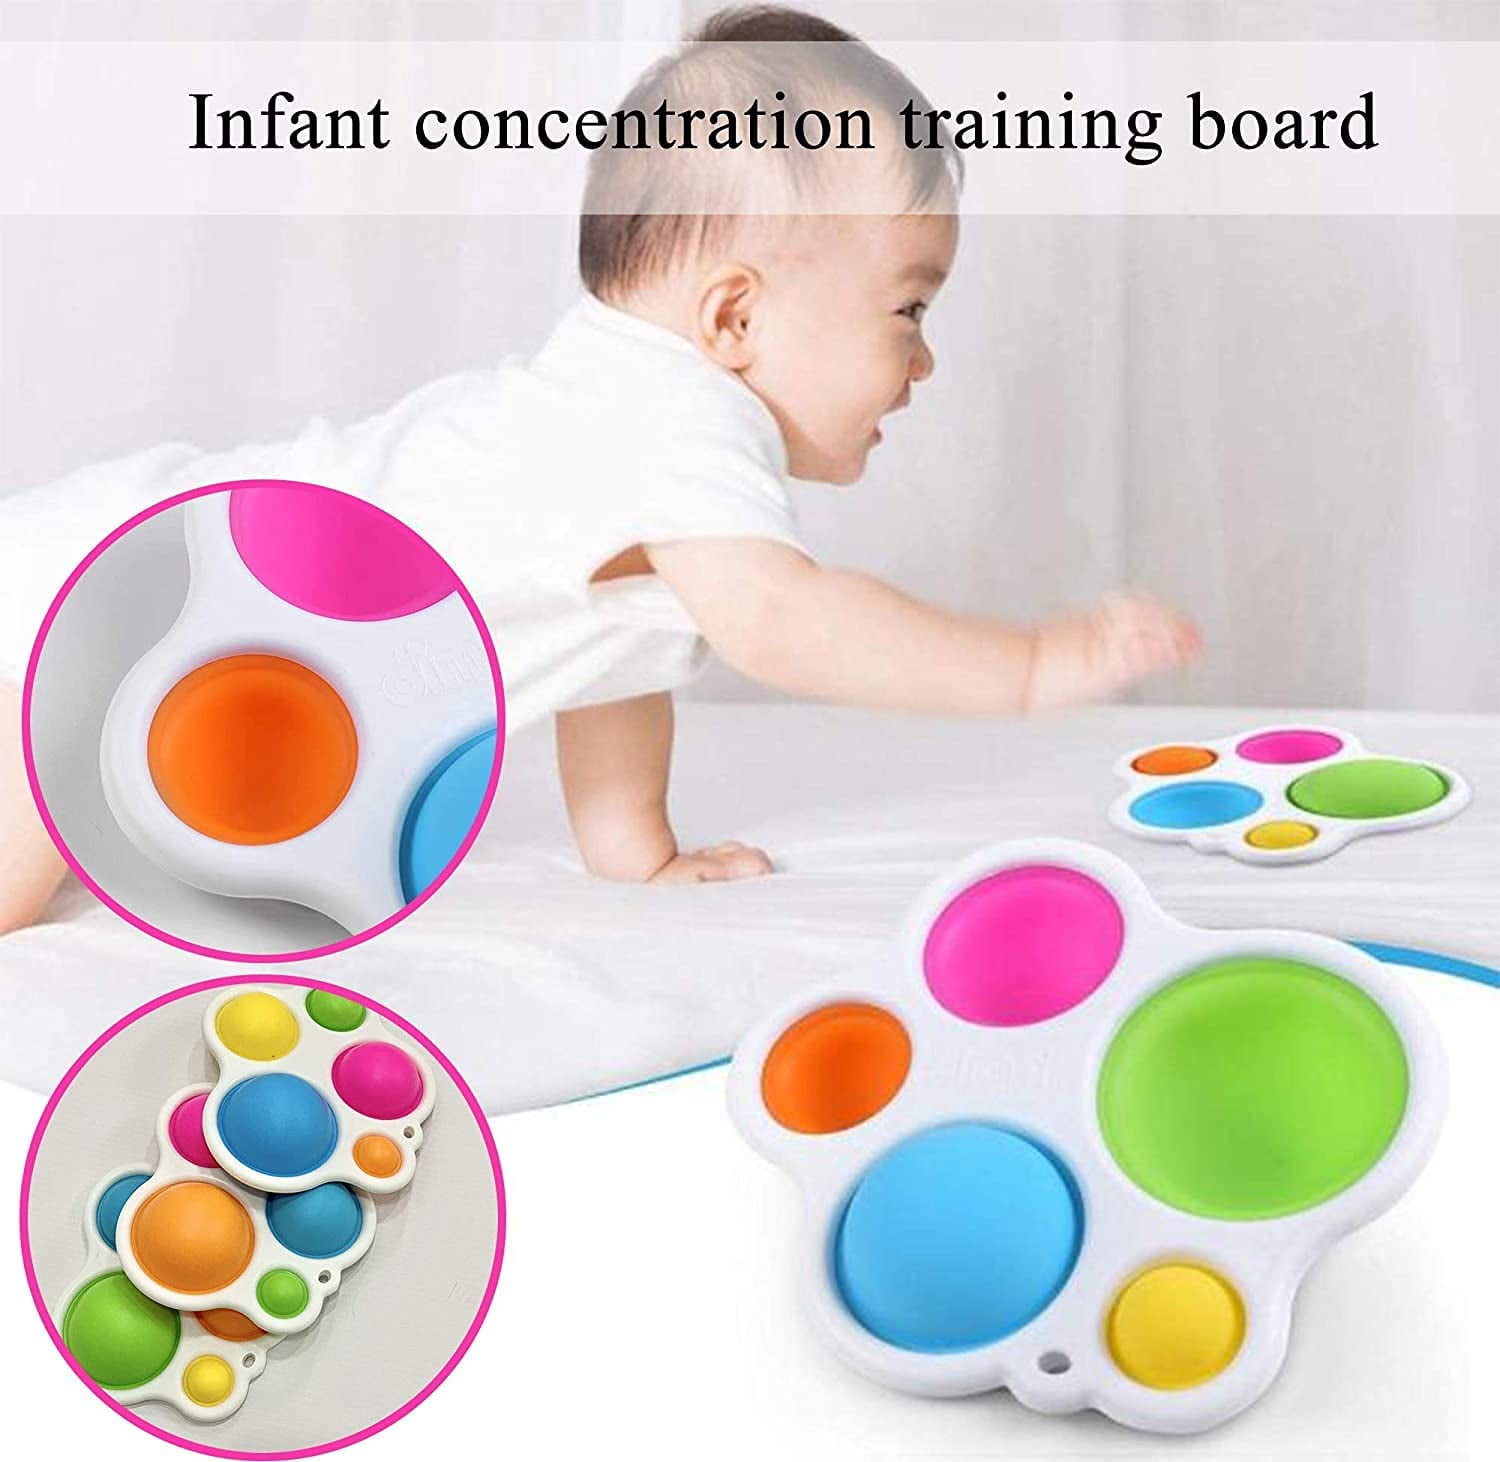 Early Educational Fidget Toy Baby Toy Soft Silicone Fidget Toy for Kids Fidget Dimple Toy Easy to use MUYSRC Simple Fidget Dimple Toy Stress Relief Hand Toys for Kids 